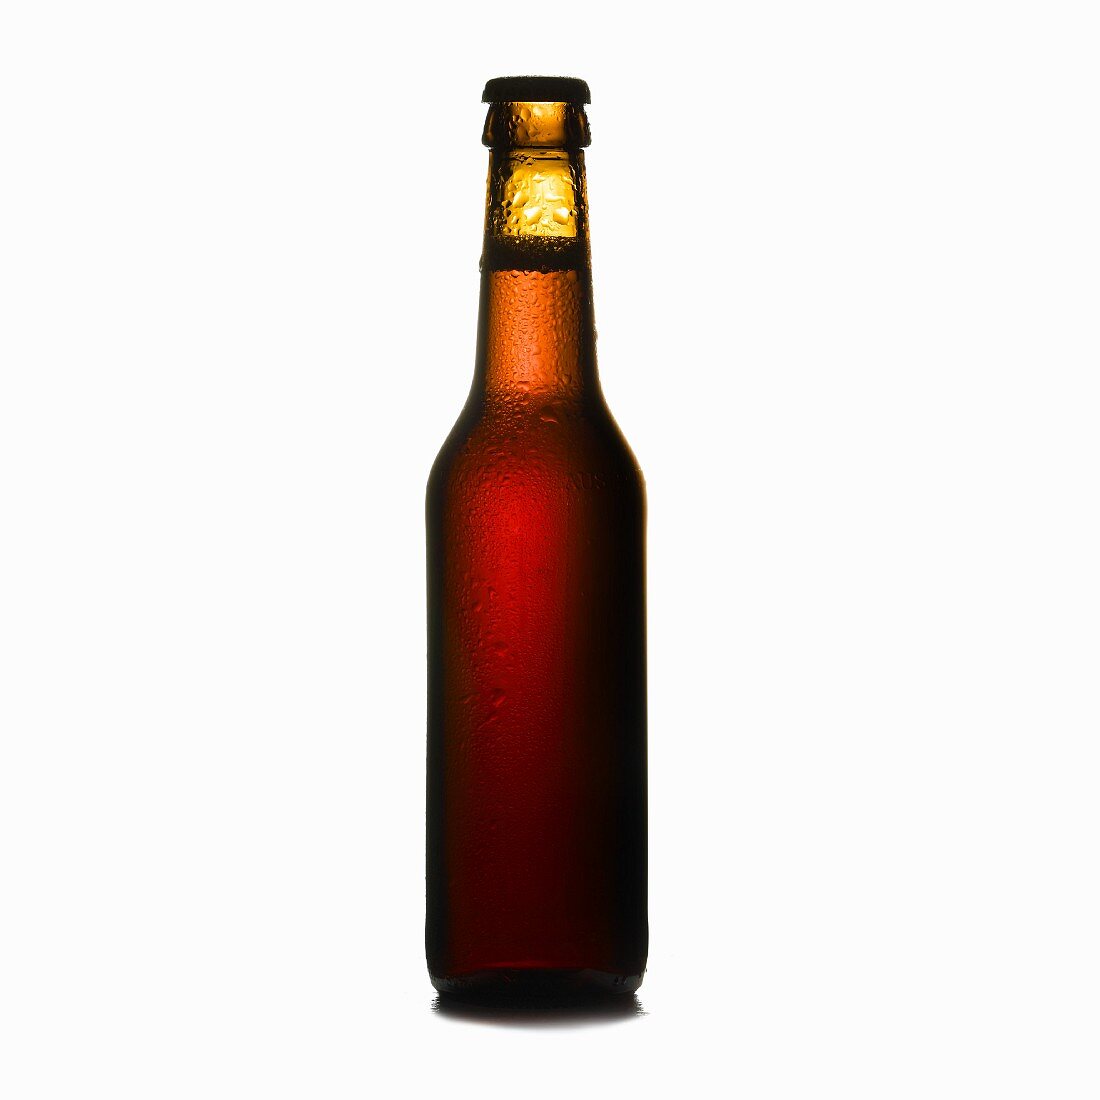 Chilled Beer Bottle on White Background